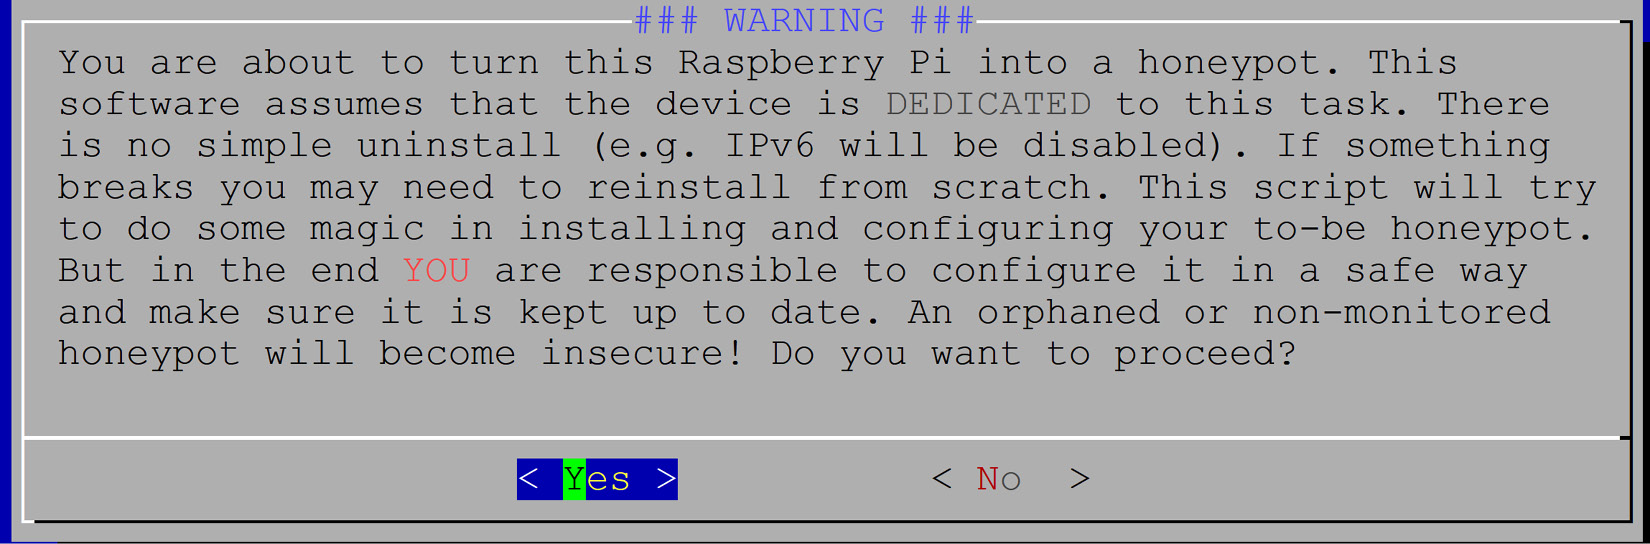 Figure 14.5 – Second warning about installation and support